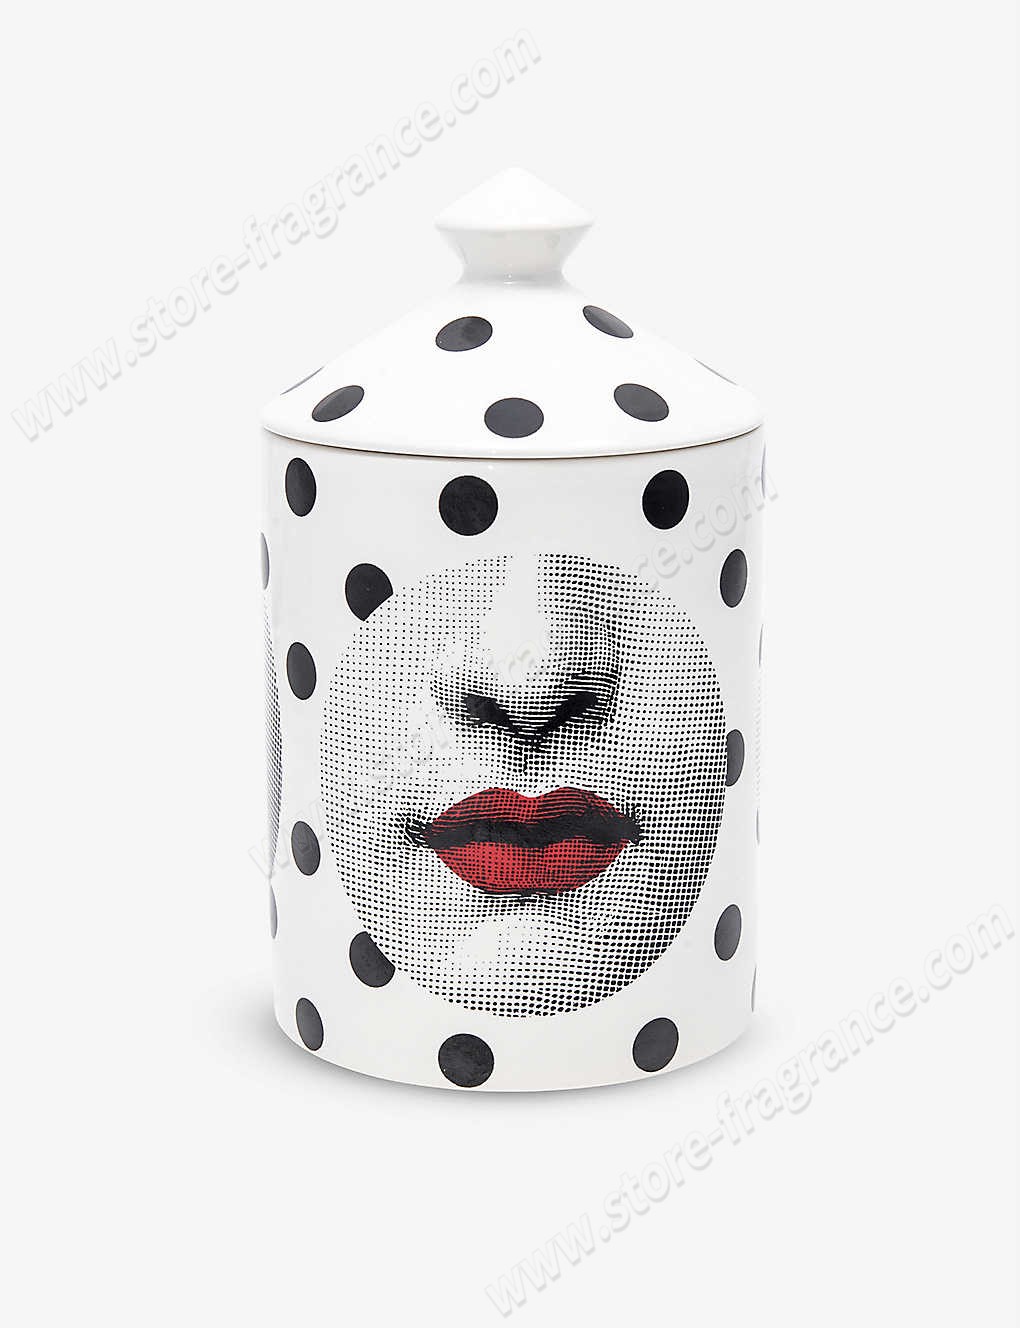 FORNASETTI/Fornasetti x Comme des Garçons Comme des Forna scented candle 300g ✿ Discount Store - FORNASETTI/Fornasetti x Comme des Garçons Comme des Forna scented candle 300g ✿ Discount Store